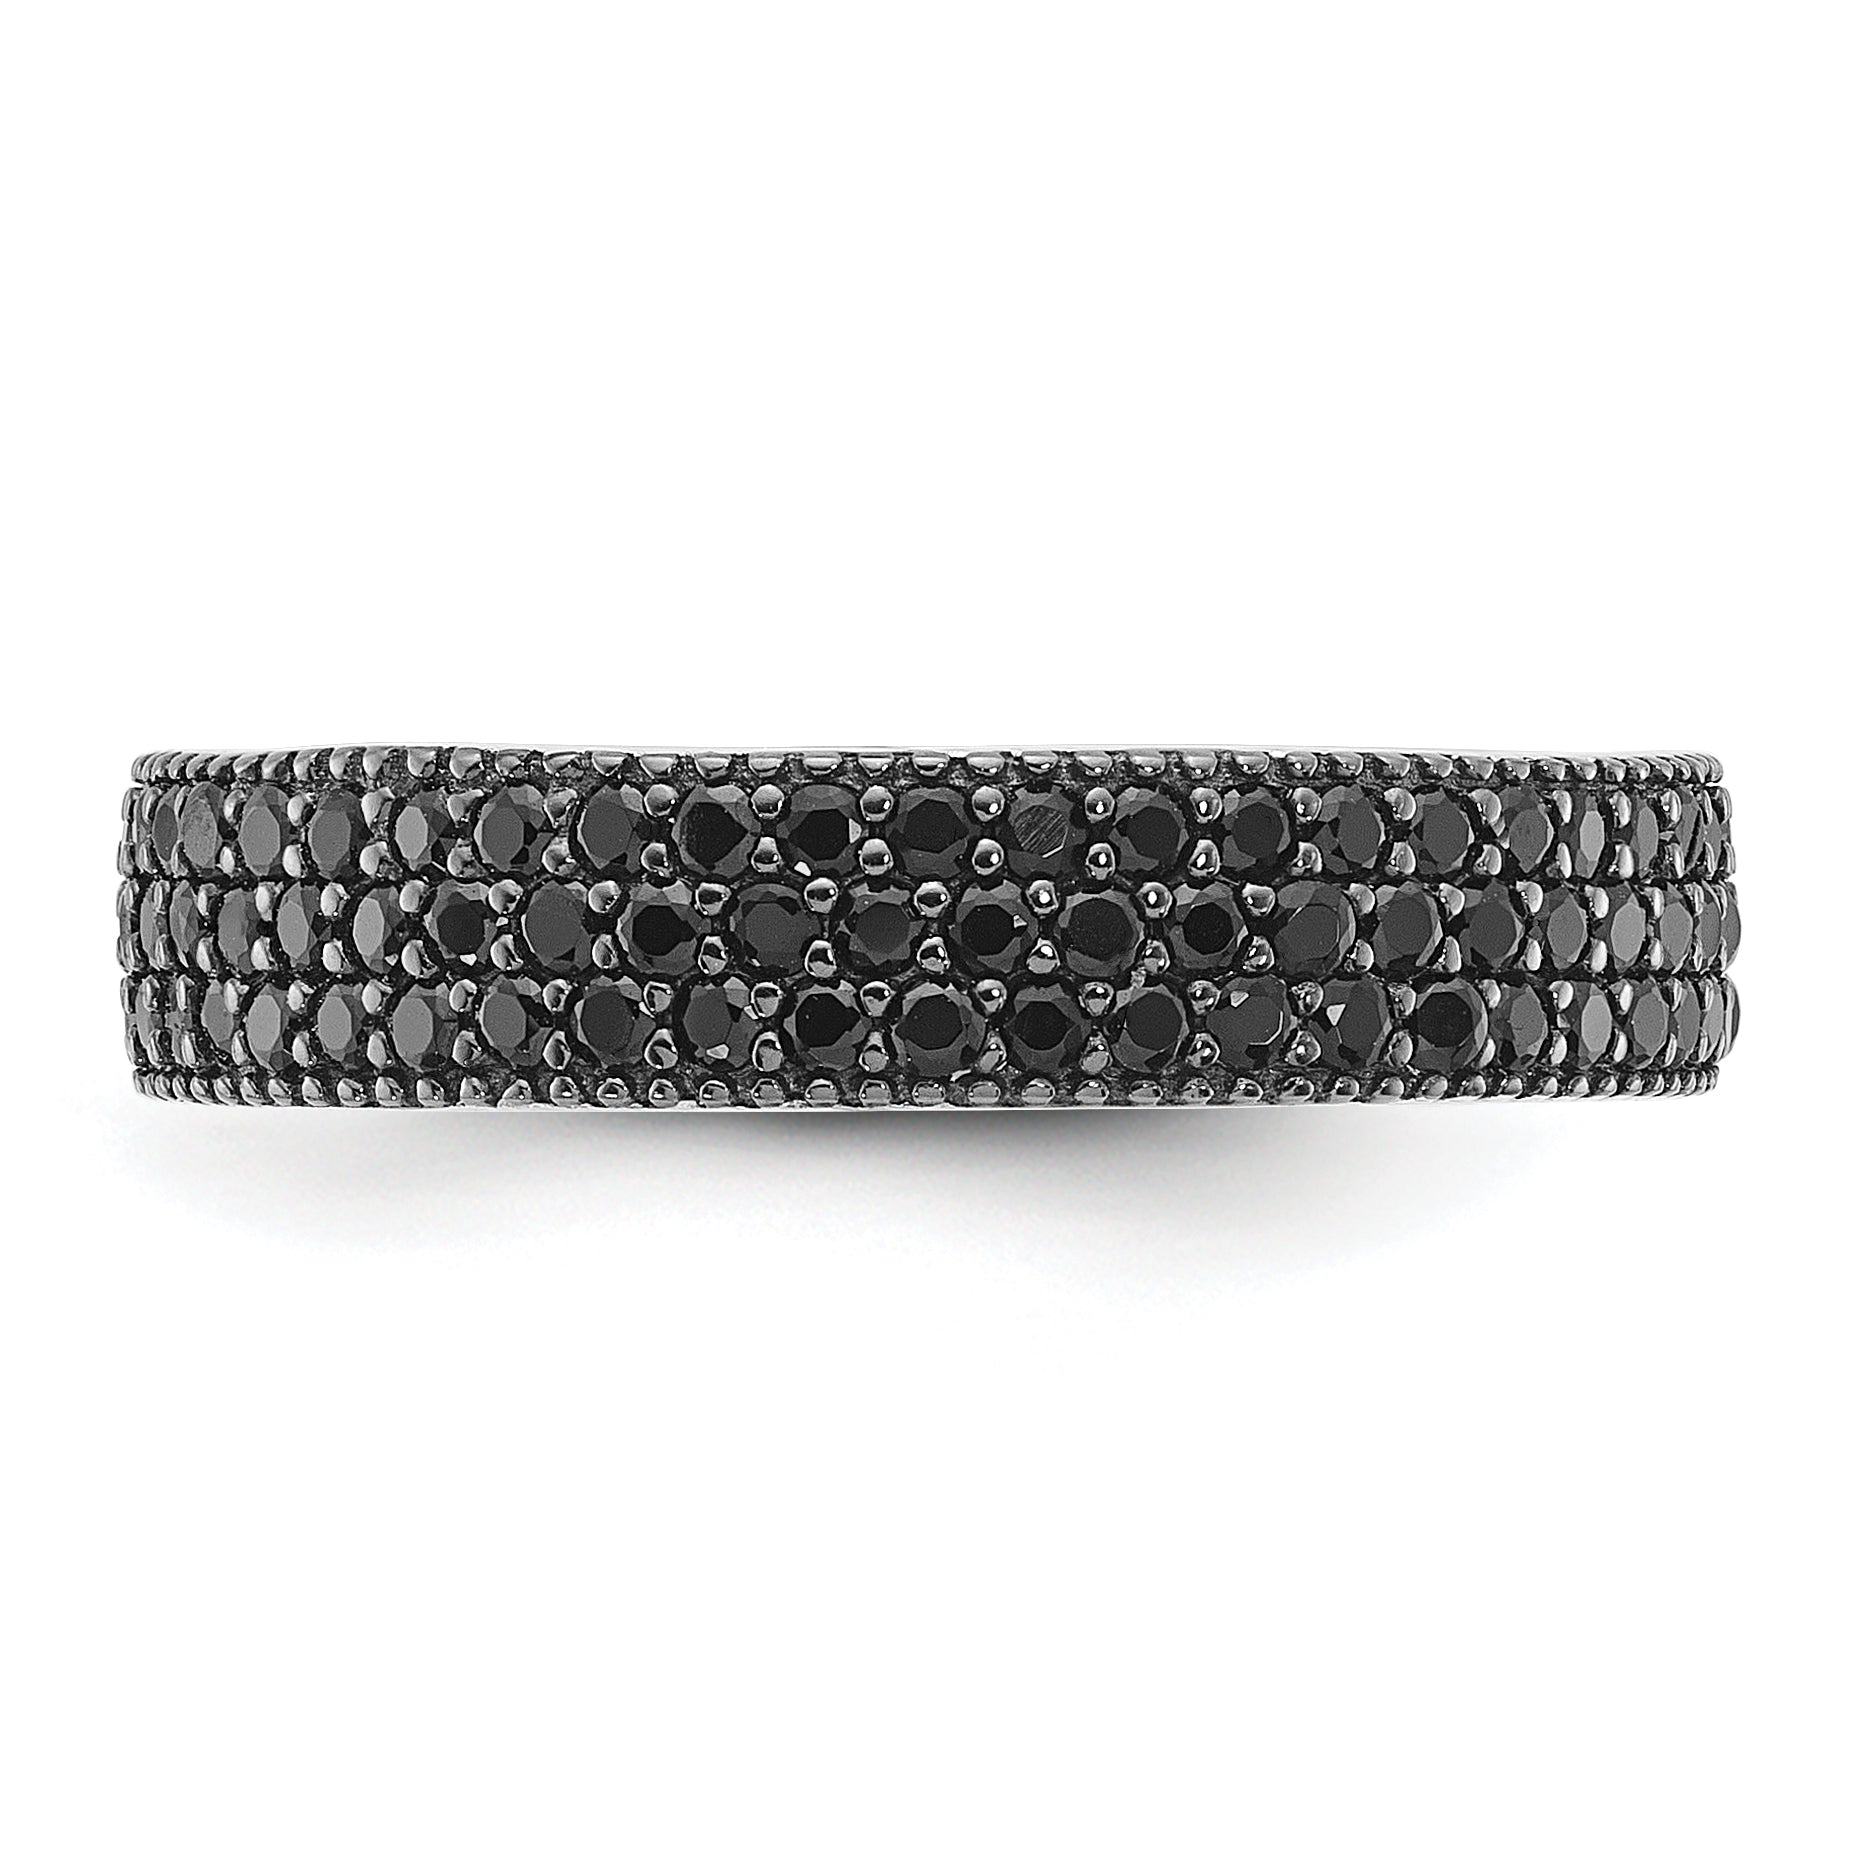 Sterling Silver Rhodium-plated Black Spinel 5mm Band